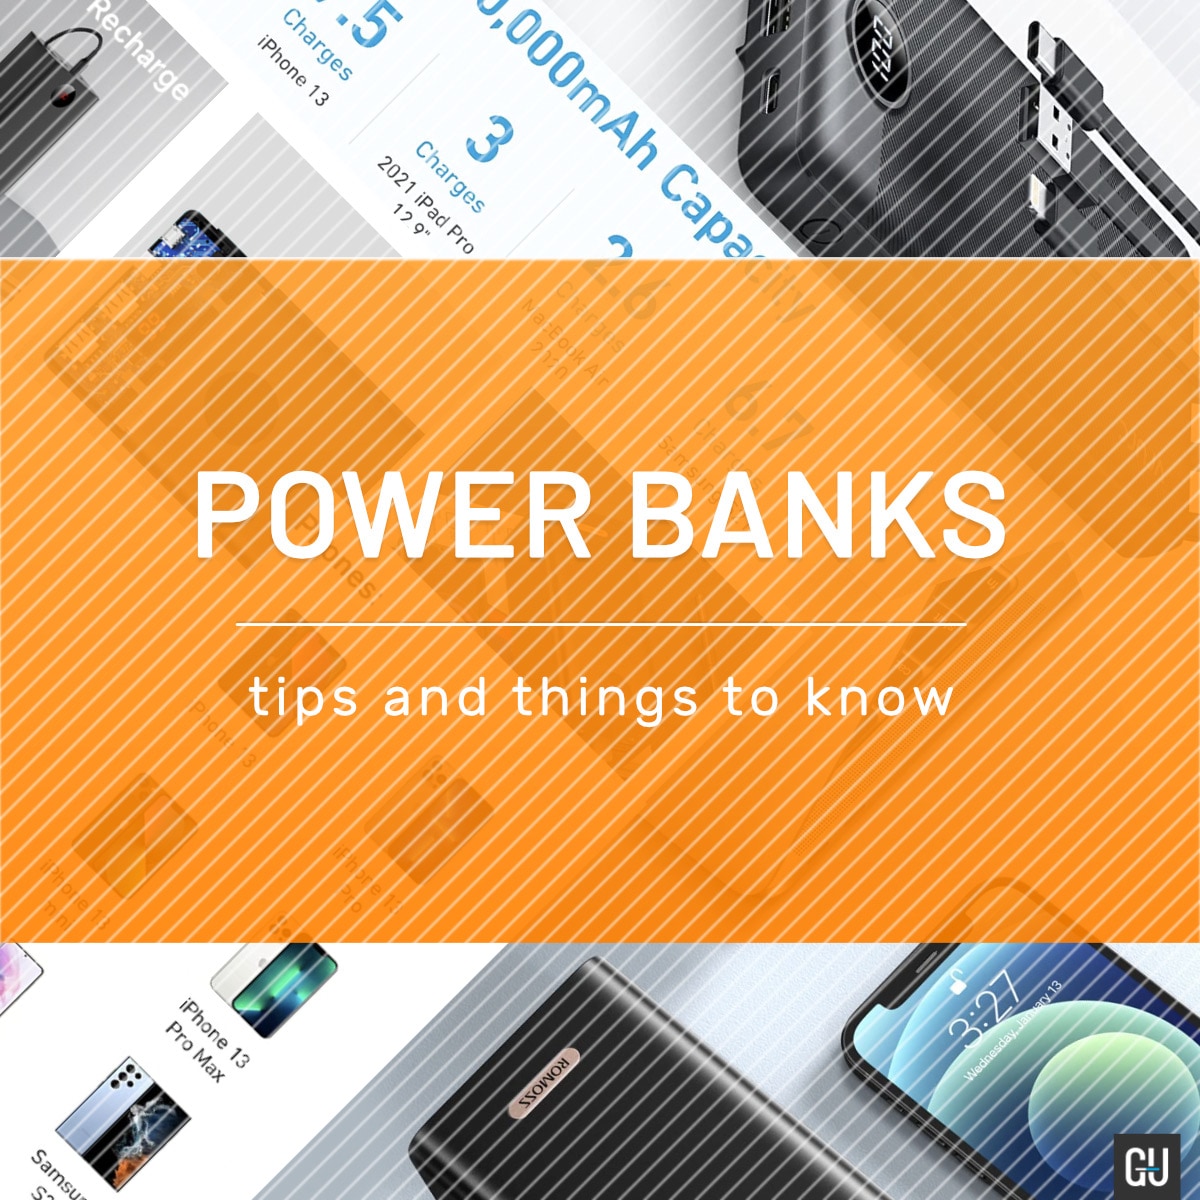 Best power banks – features, types, specs, and things to know